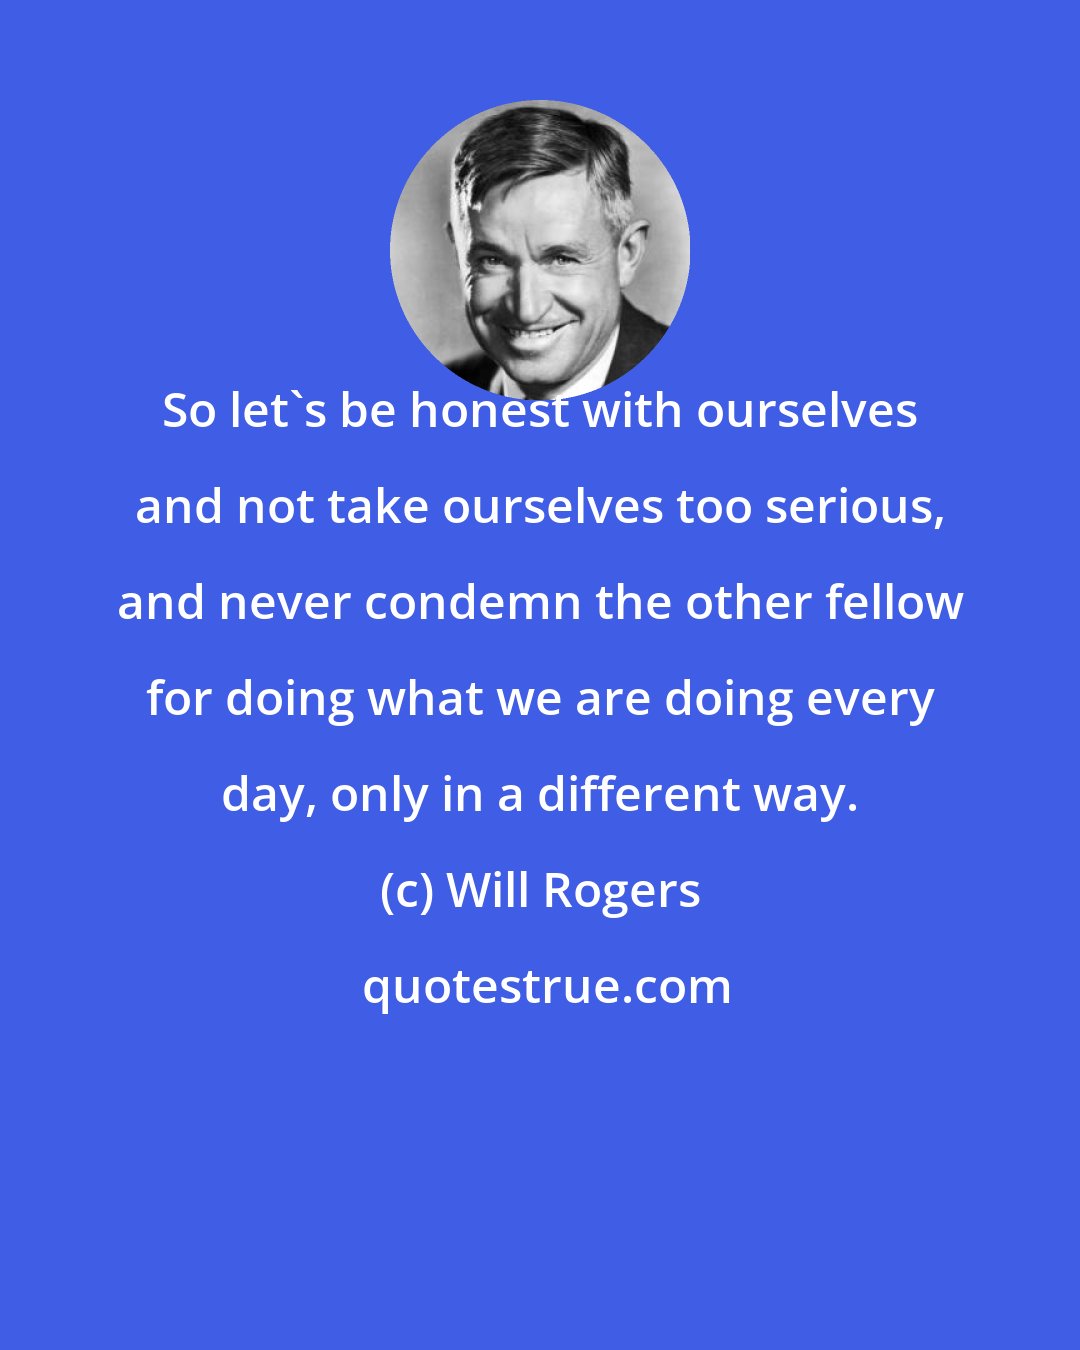 Will Rogers: So let's be honest with ourselves and not take ourselves too serious, and never condemn the other fellow for doing what we are doing every day, only in a different way.